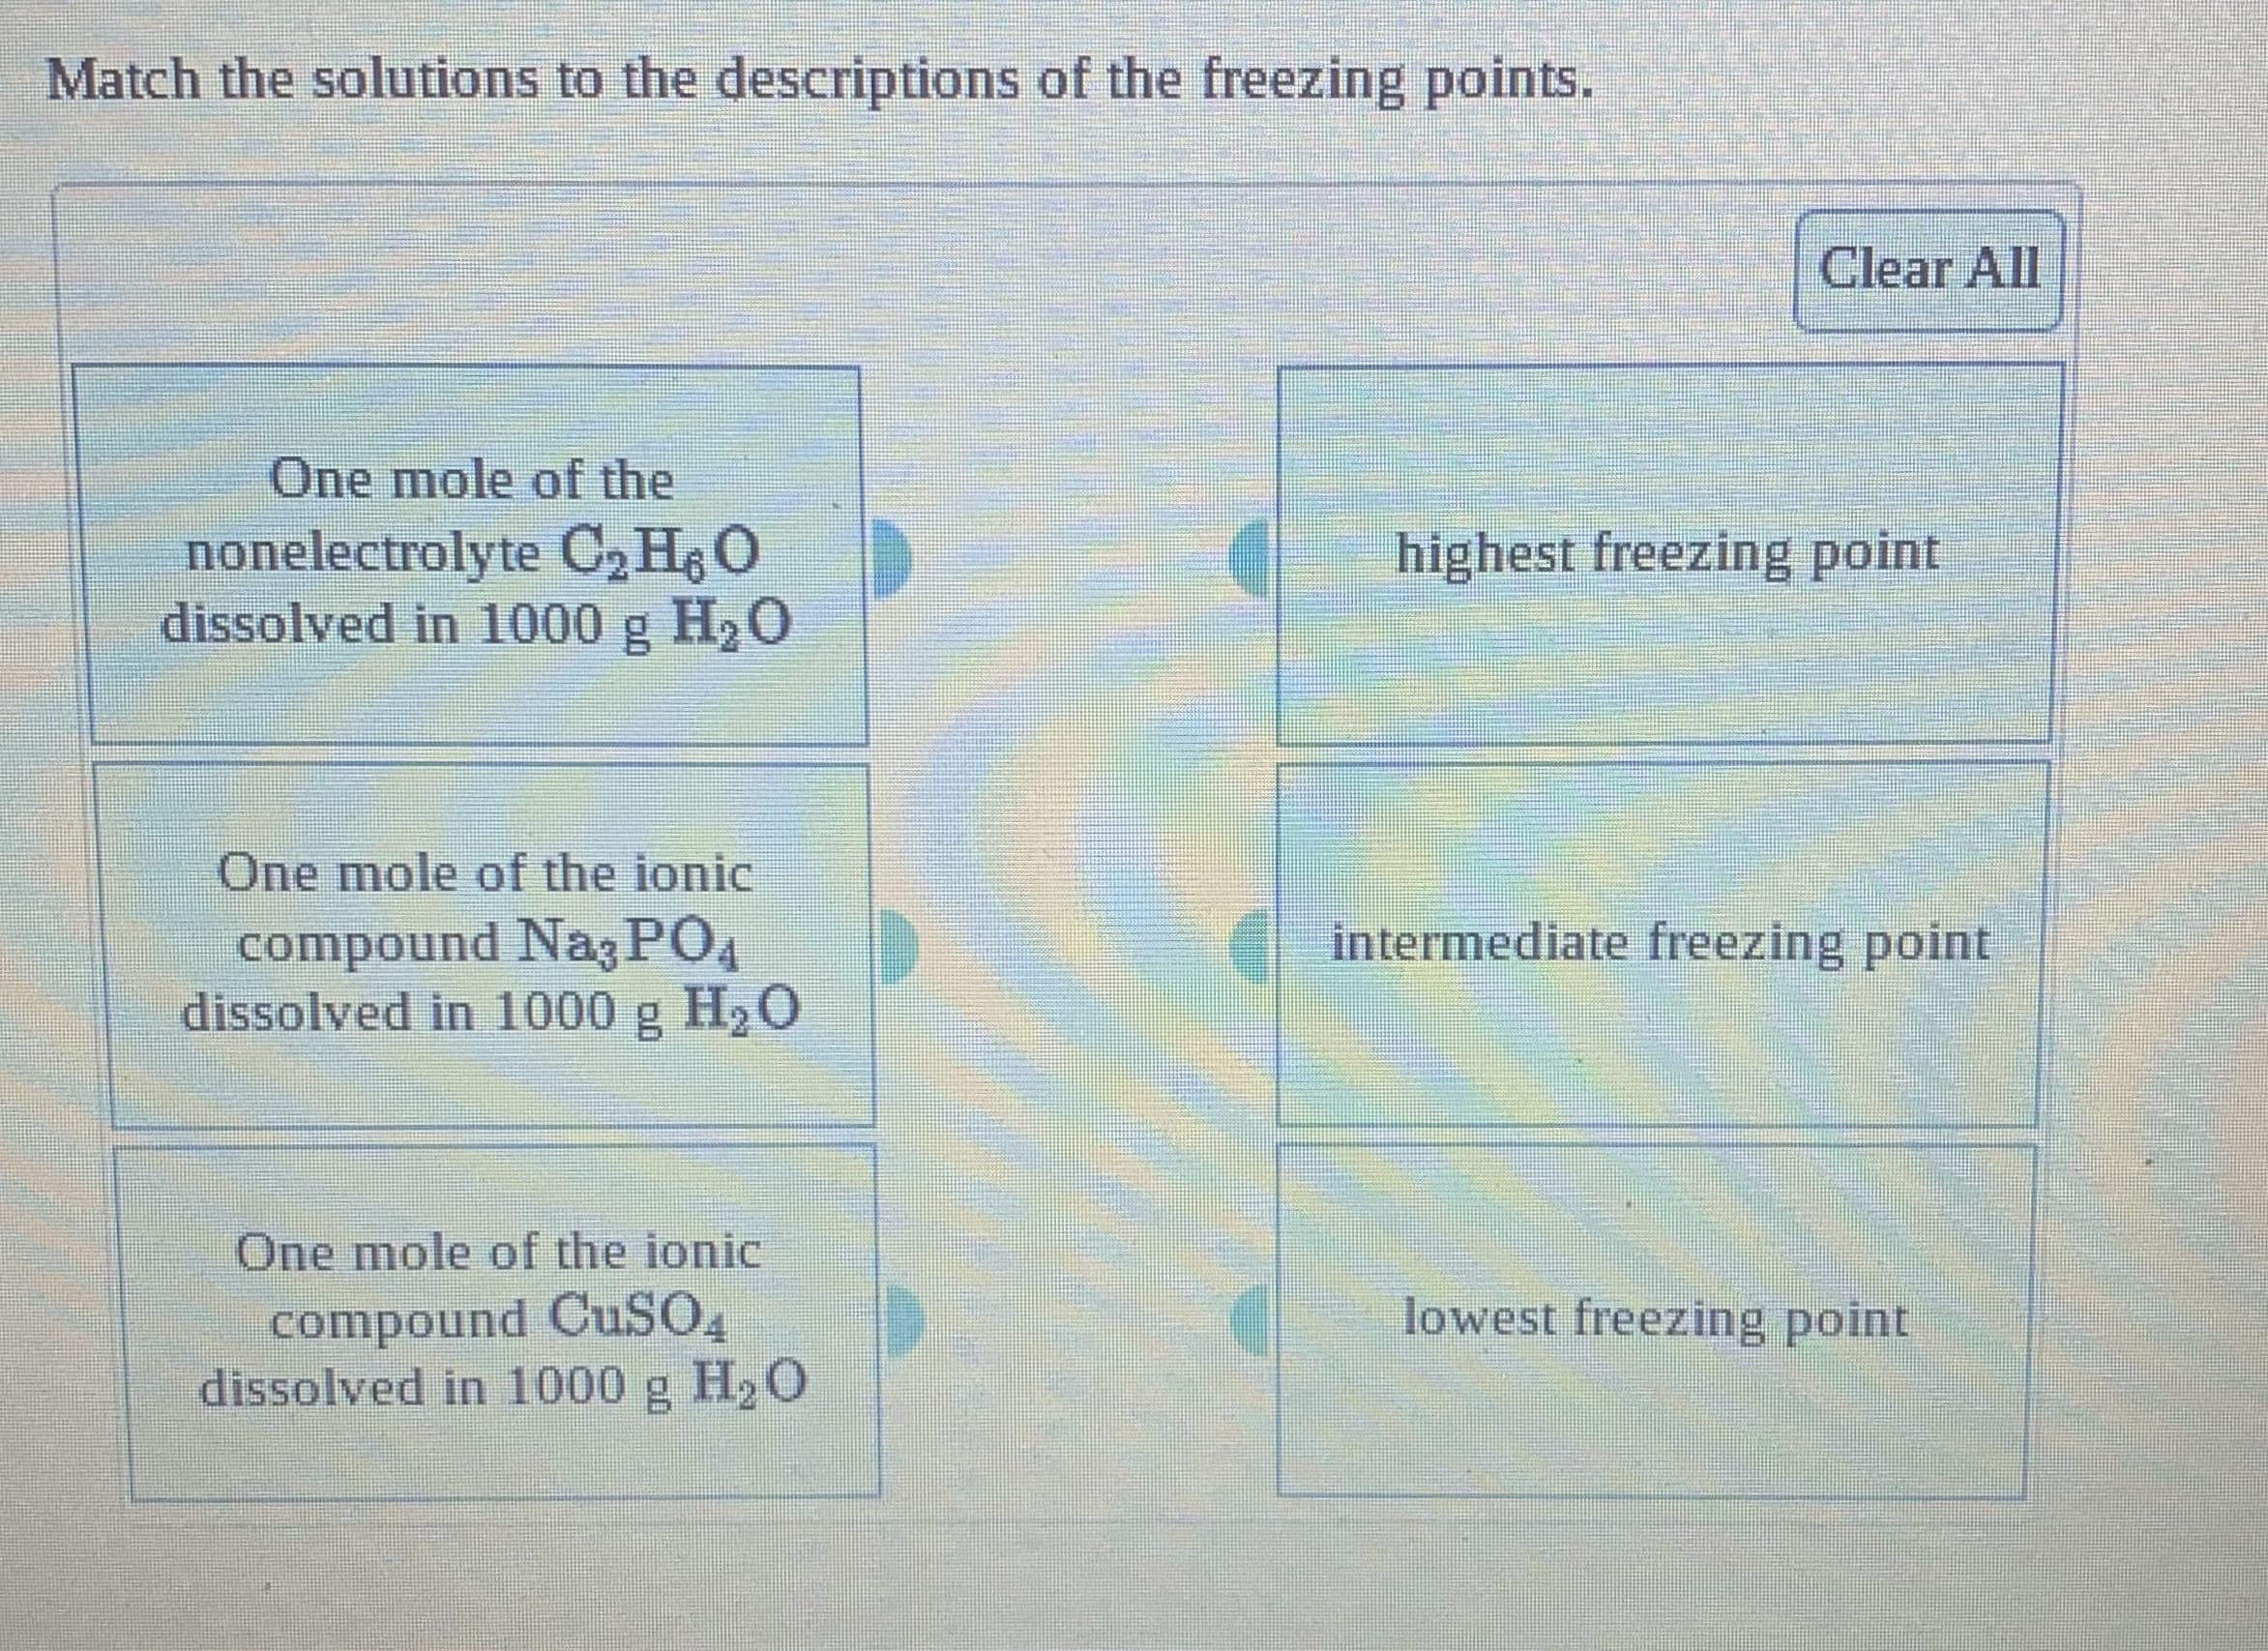 Match the solutions to the descriptions of the freezing points.
Clear All
One mole of the
nonelectrolyte C, H O
dissolved in 1000 g H,O
highest freezing point
One mole of the ionic
intermediate freezing point
compound Nag PO4
dissolved in 1000 g H2O
One mole of the ionic
compound CUSO,
dissolved in 1000 g H2 O
lowest freezing point
